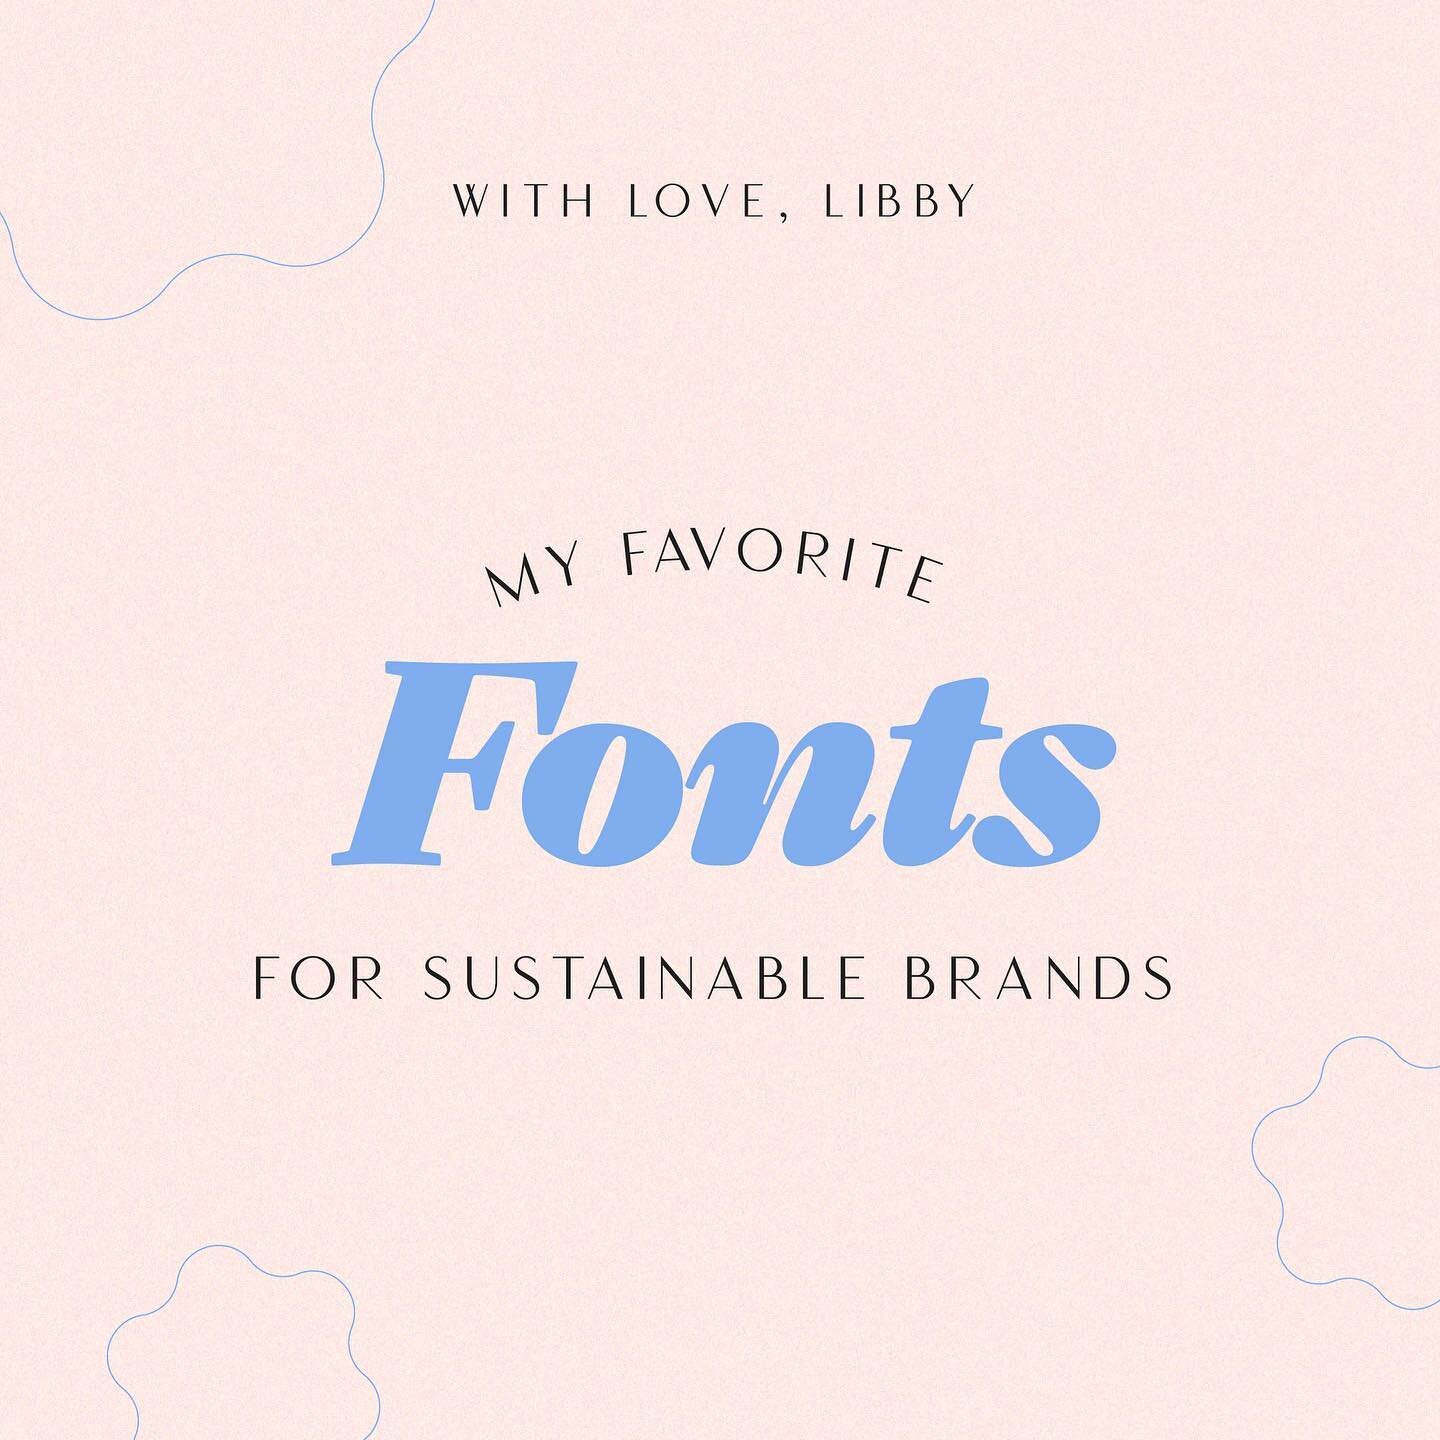 There are so many directions you could go when choosing typography for a brand, so it&rsquo;s important to know your brand&rsquo;s values, story and mission. ✨

Brands that focus on sustainability, for example, should ask themselves questions like, &